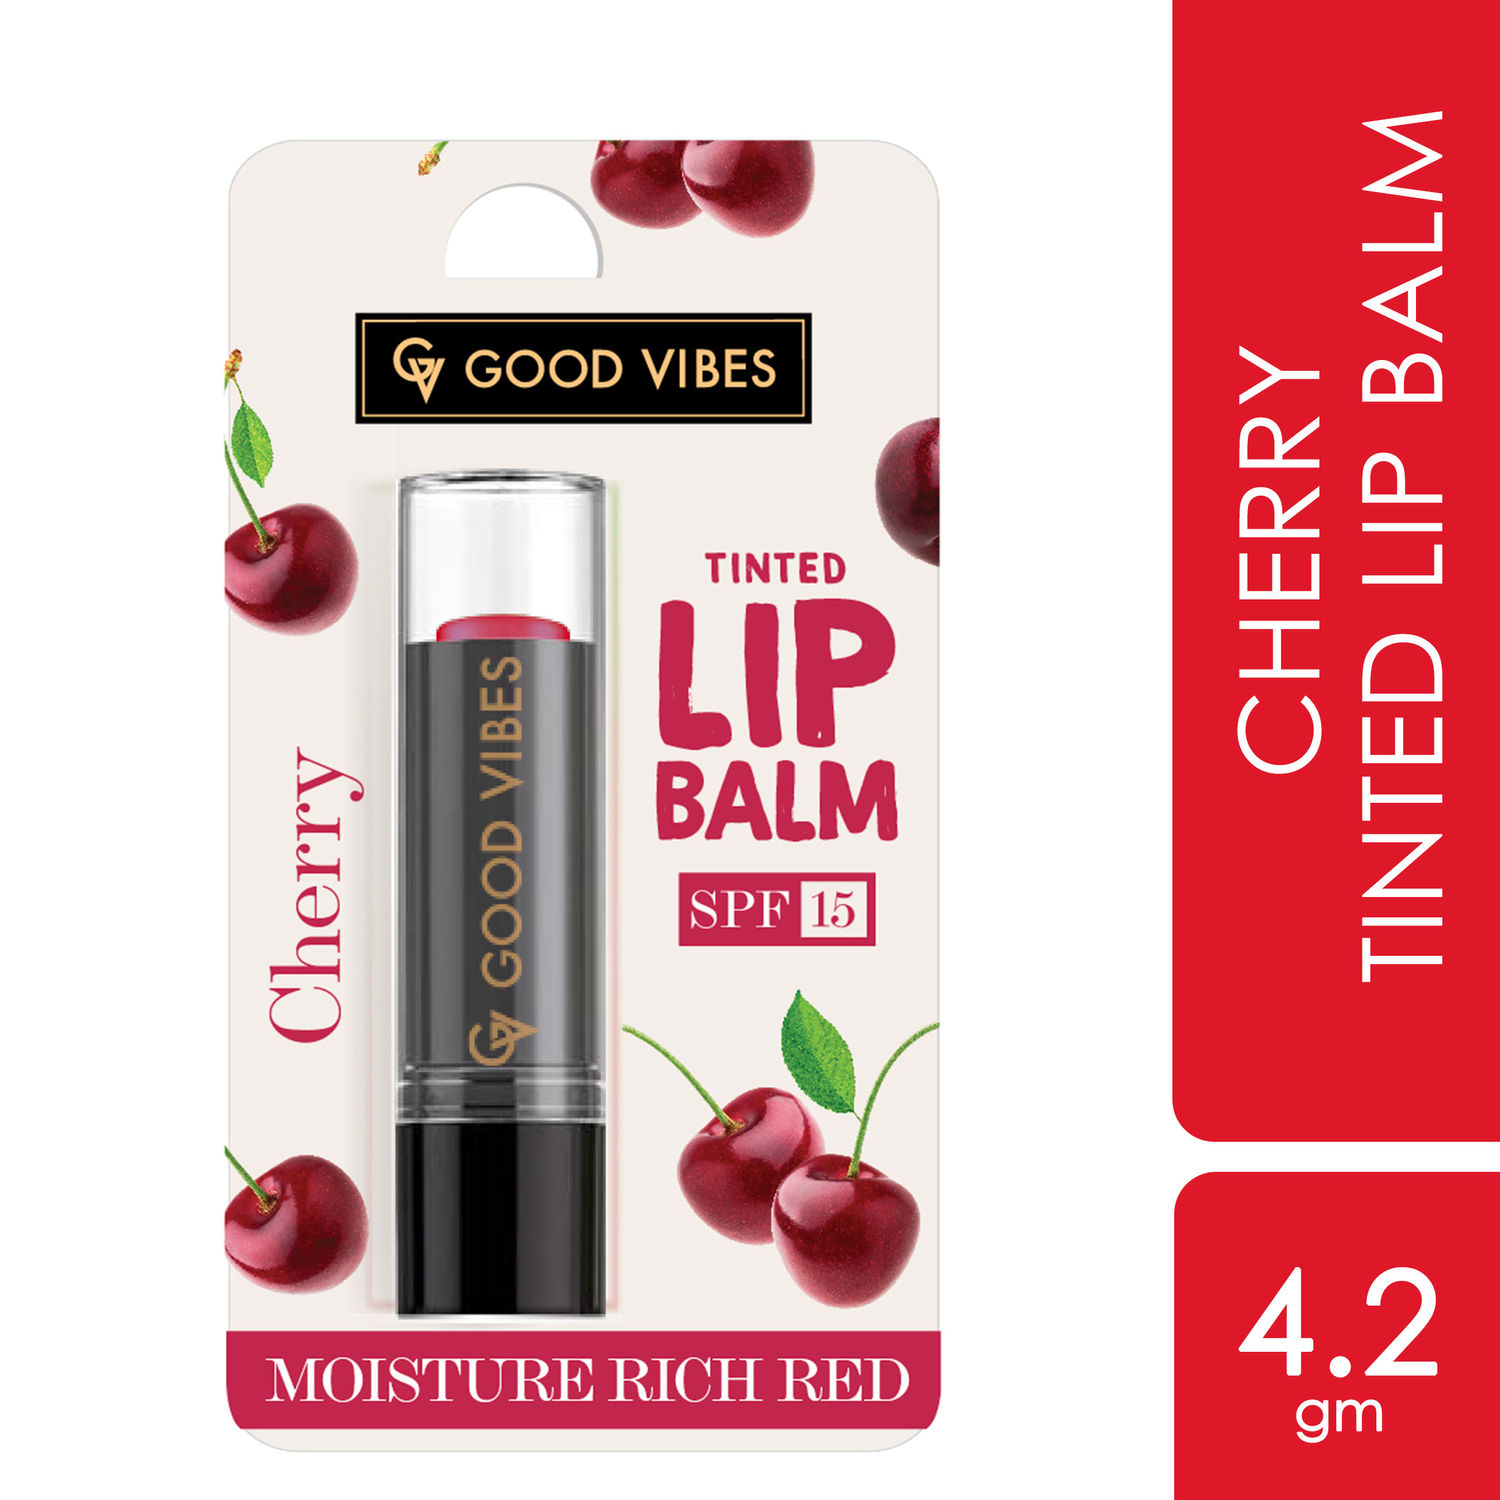 Good Vibes Cherry Moisture Rich Red Tinted Lip Balm SPF 15 | Plum & Glossy, Softening | Vegan, No Parabens, No Sulphates, No Mineral Oil, No Animal Testing, No Silicones (4.2 g)